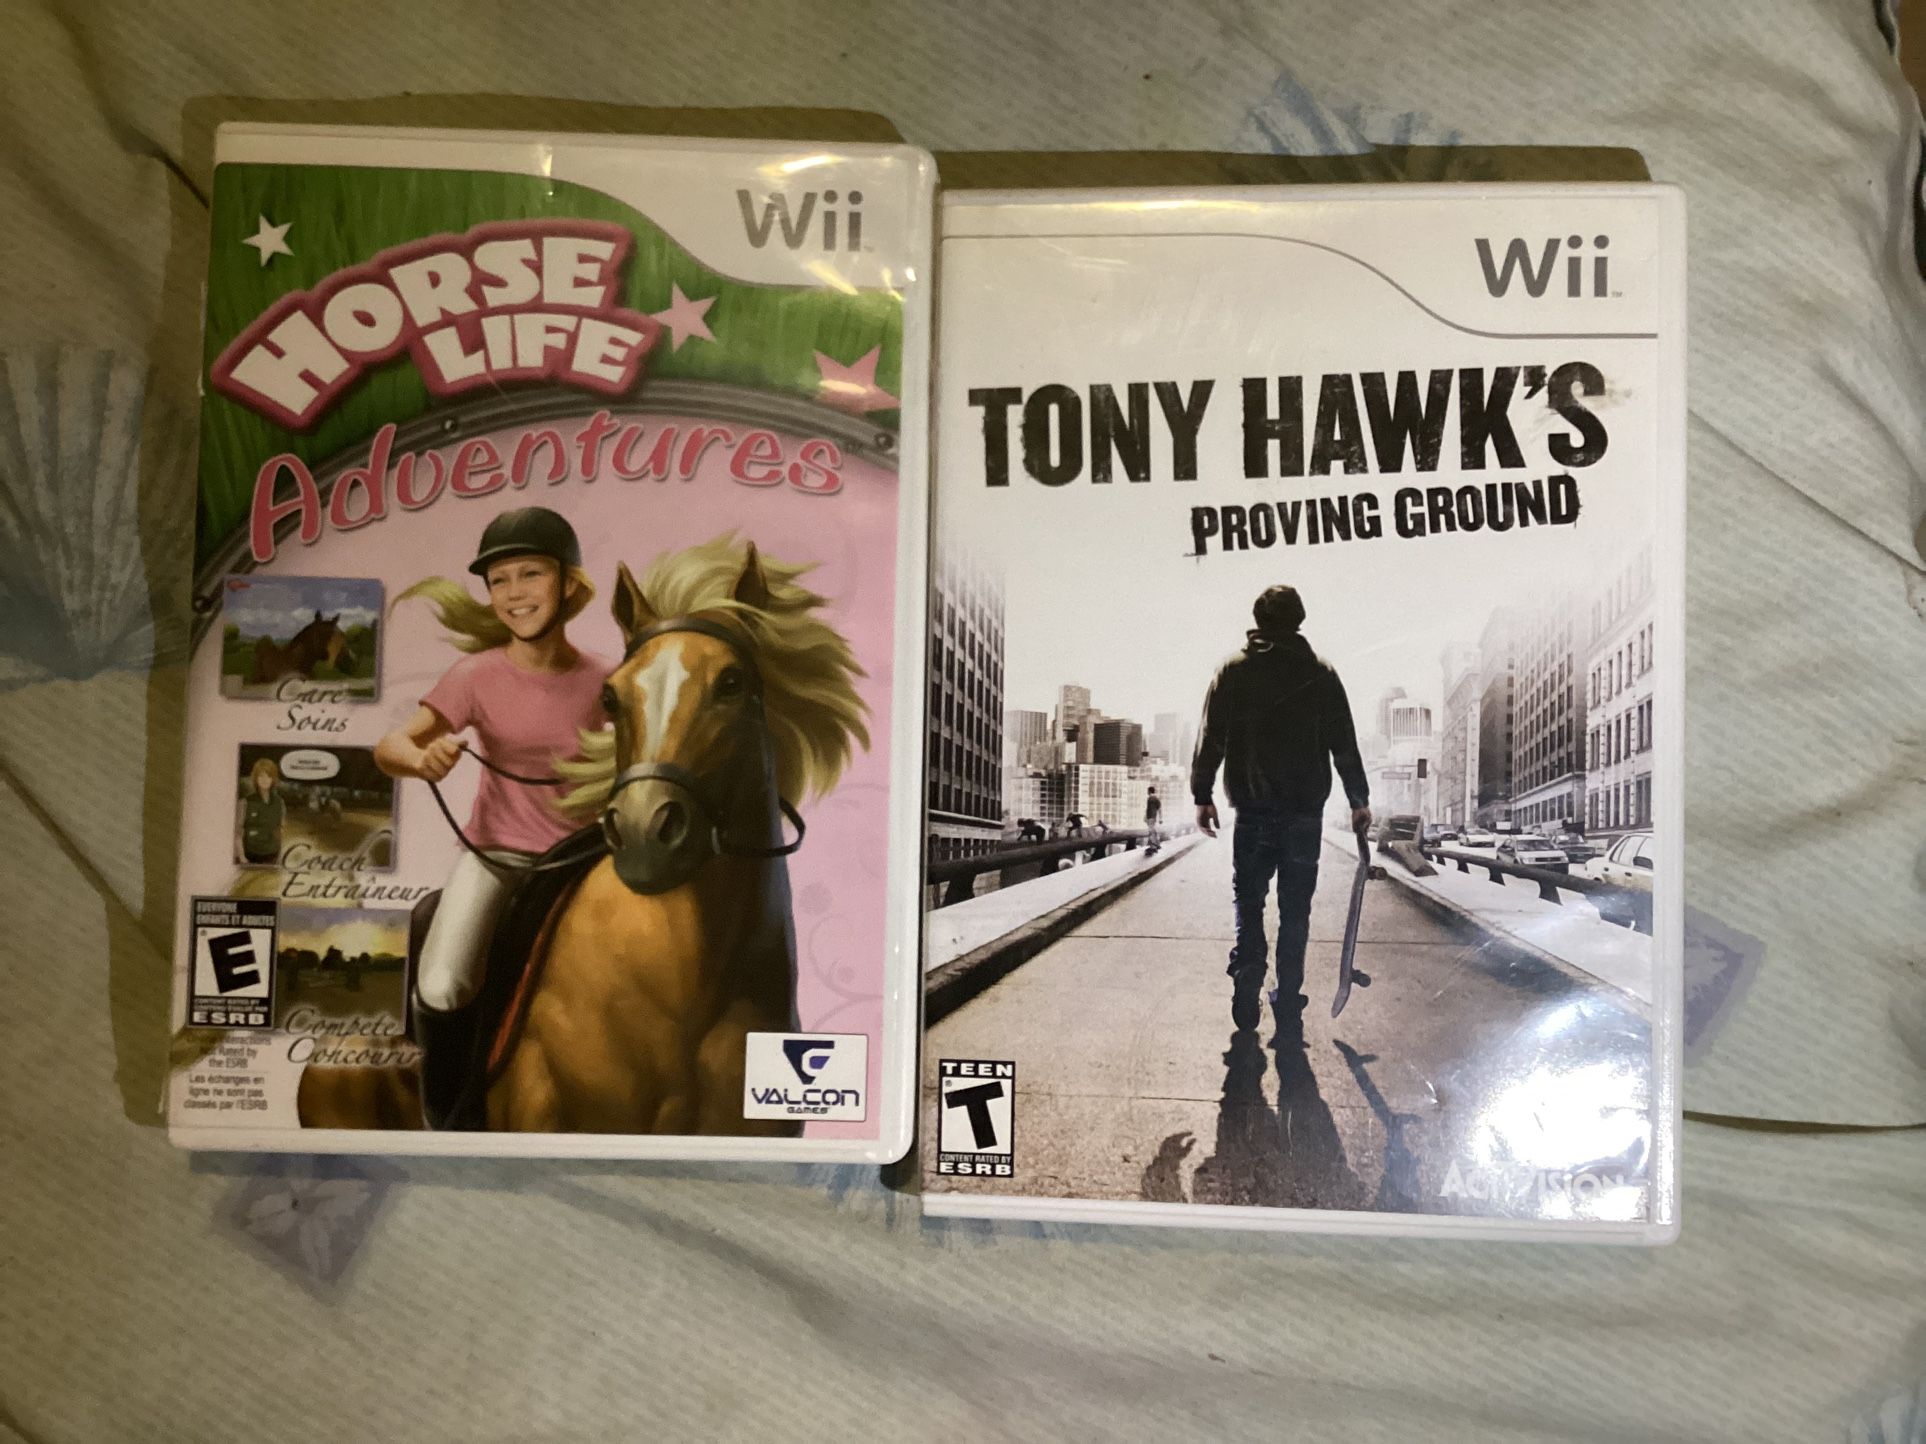 Tony hawk proving ground and Horse life adventures for Nintendo Wii